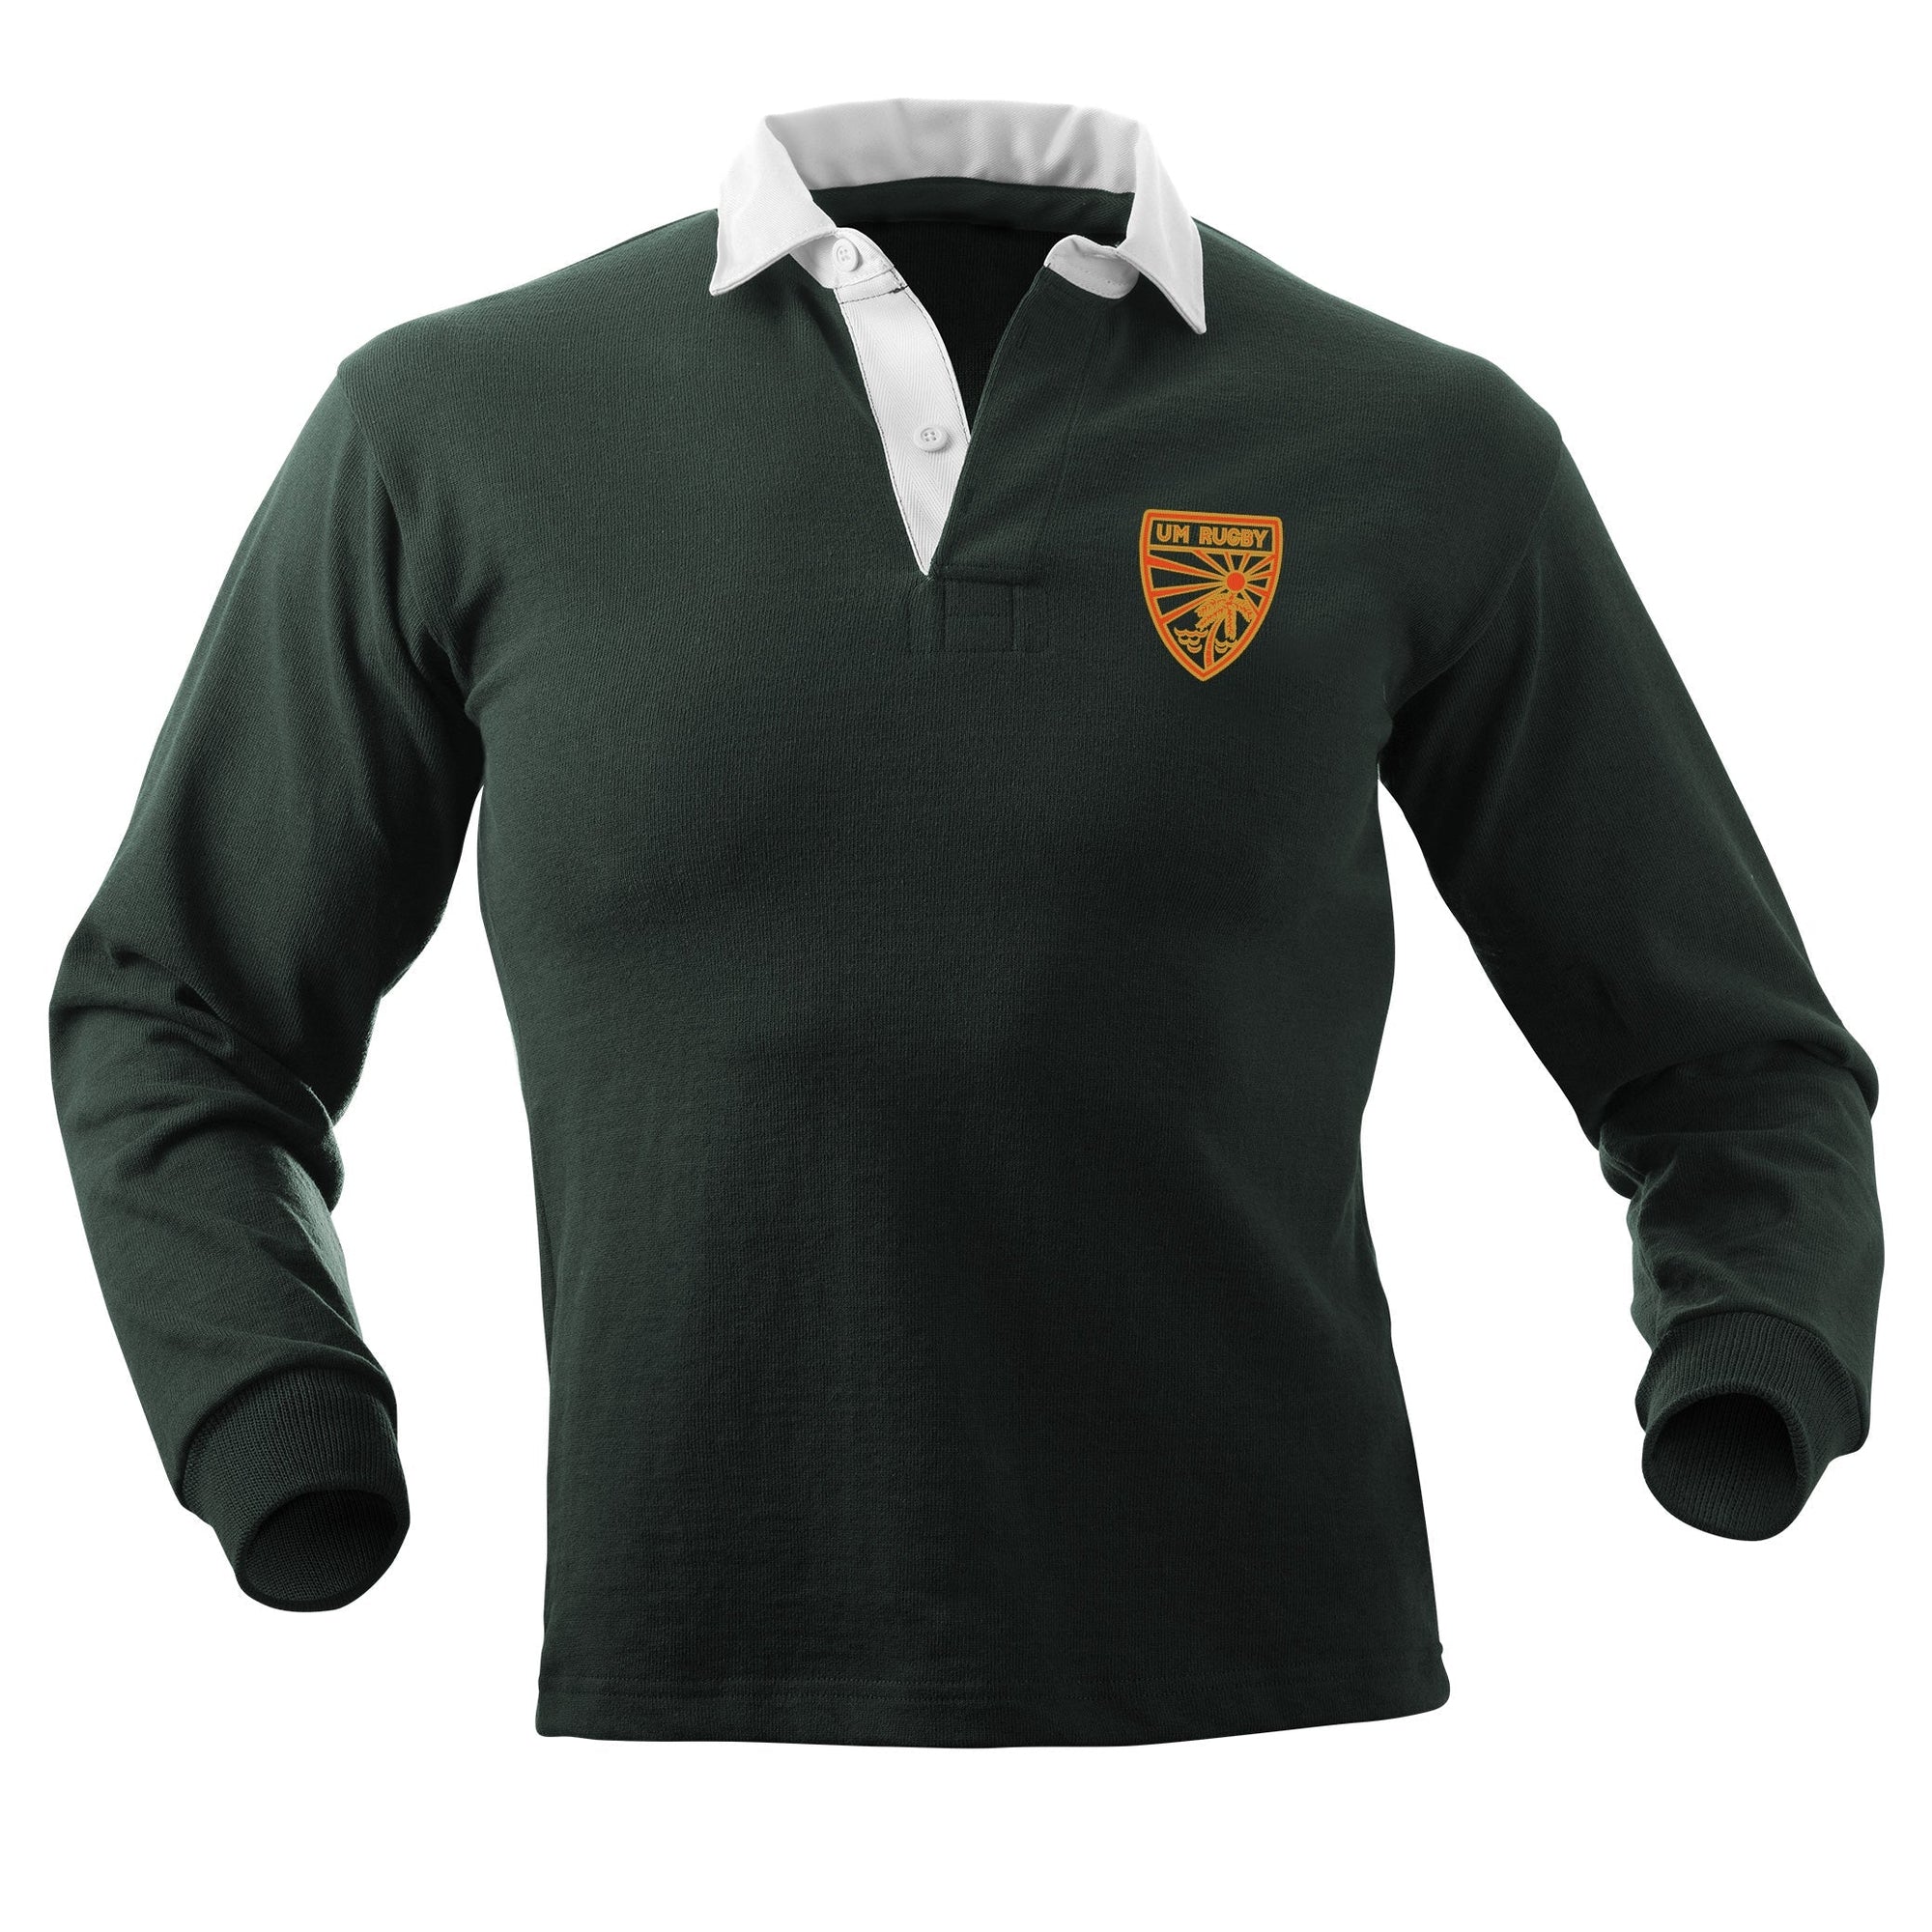 Rugby Imports UMiami Rugby Traditional Jersey